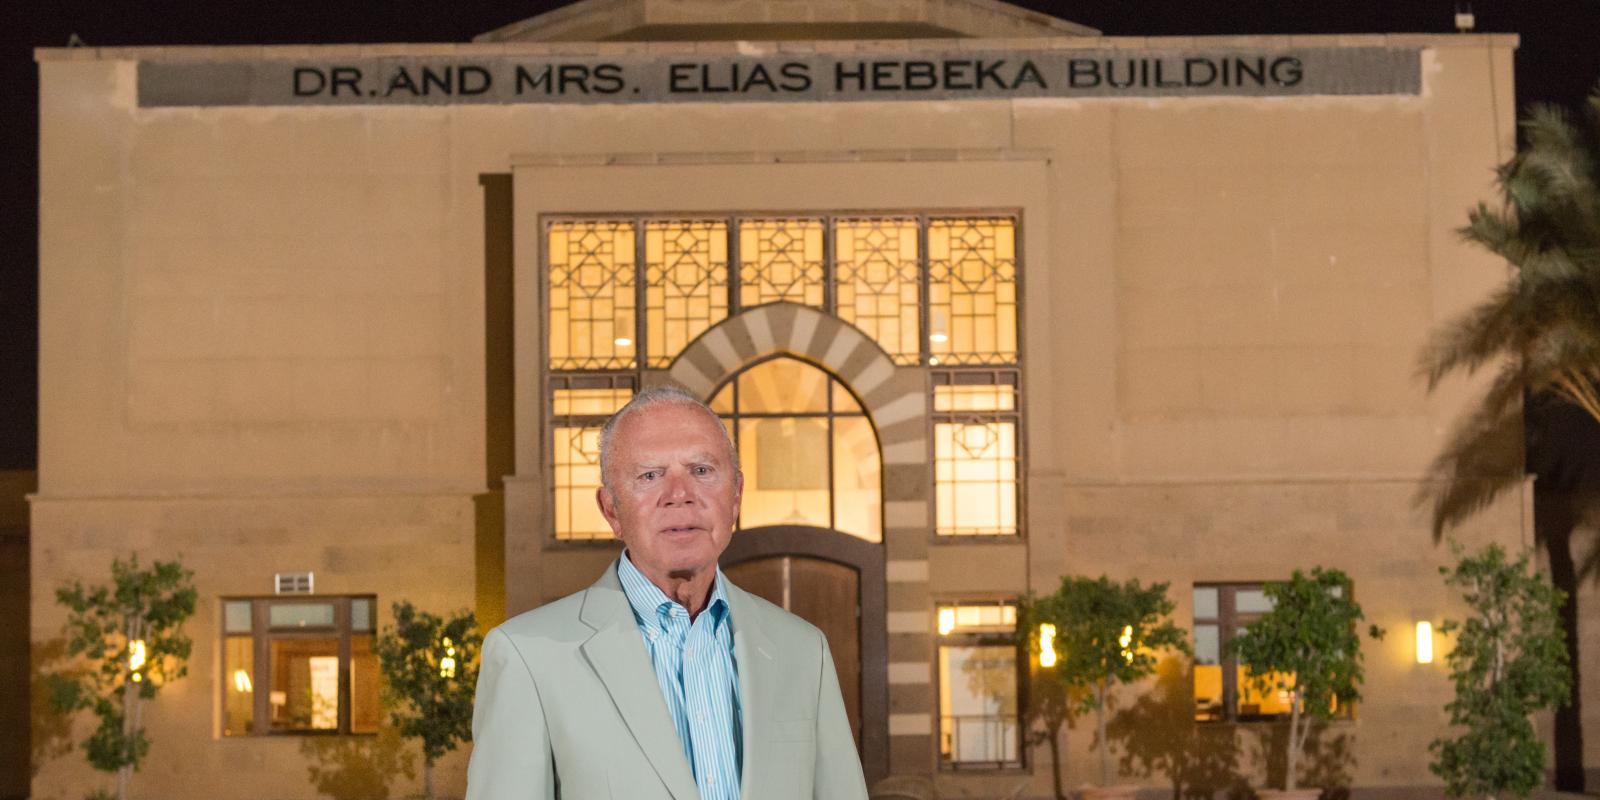 The late Elias Hebeka standing in front of the building in his name on campus 